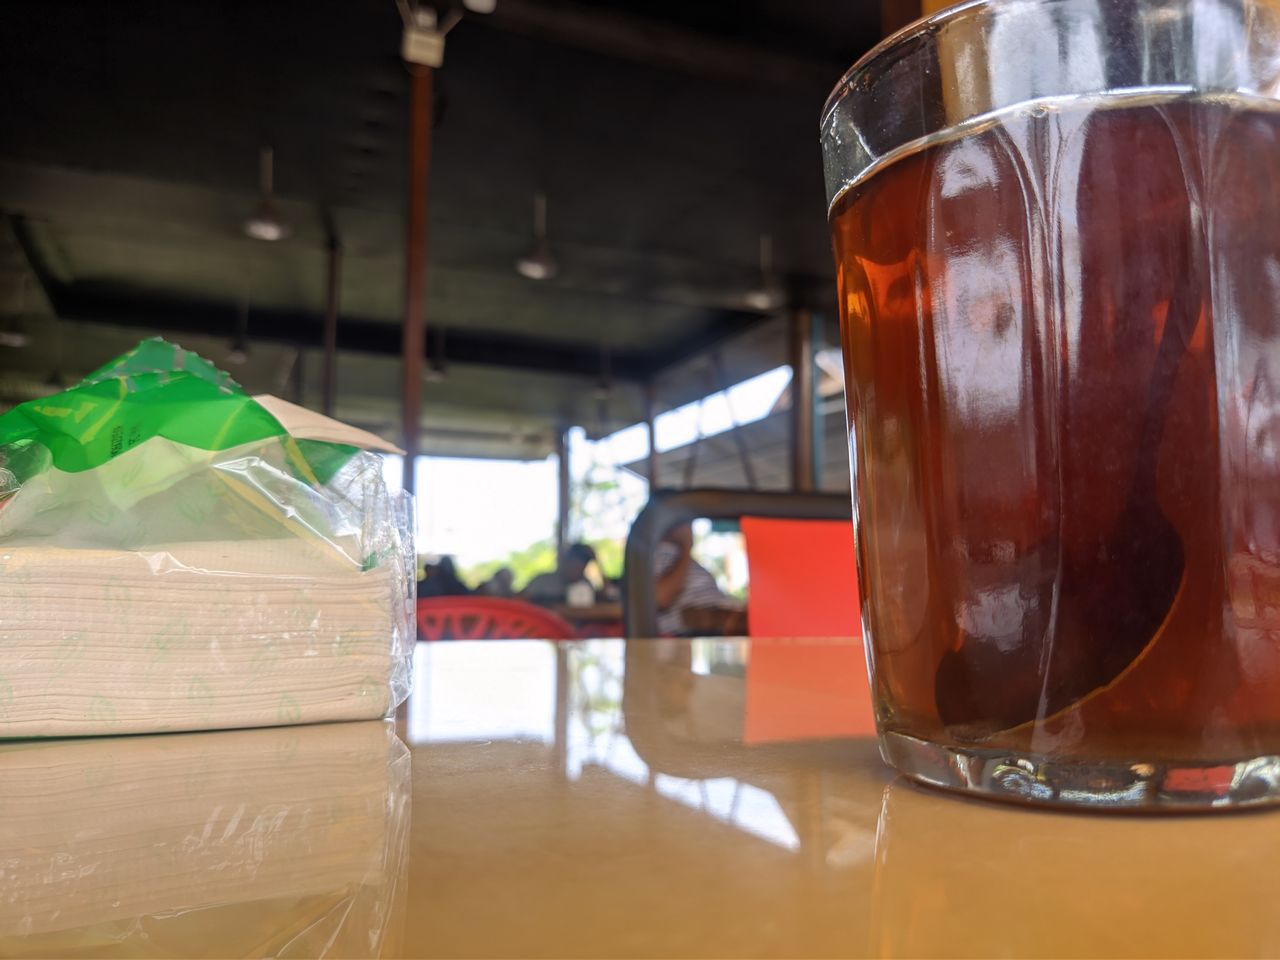 food and drink, drink, refreshment, indoors, alcoholic beverage, soft drink, alcohol, food, household equipment, glass, business, no people, drinking glass, freshness, container, focus on foreground, table, close-up, beer